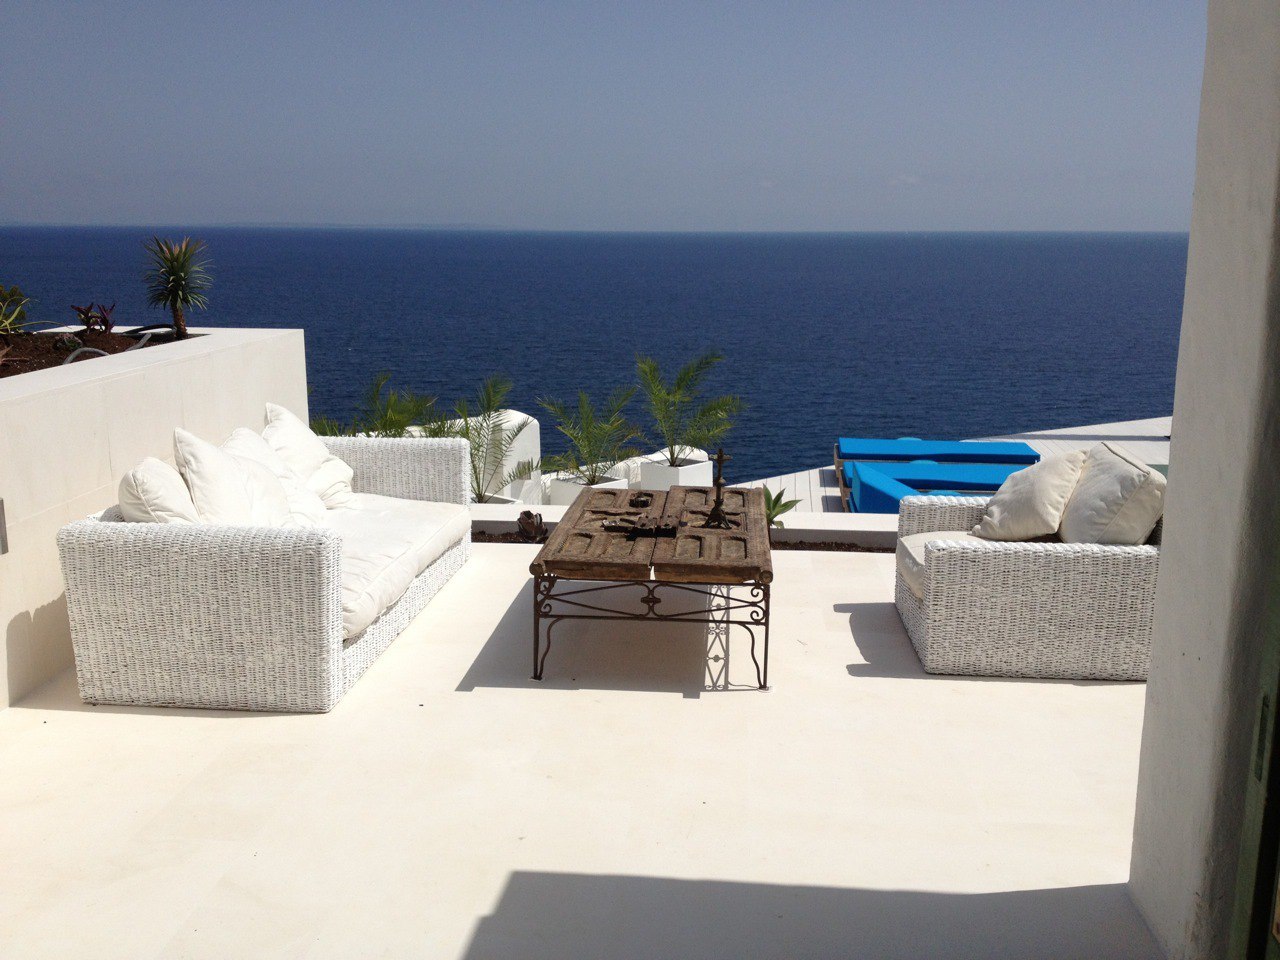 Luxury villas located in front of the sea in Es Cubells for rent